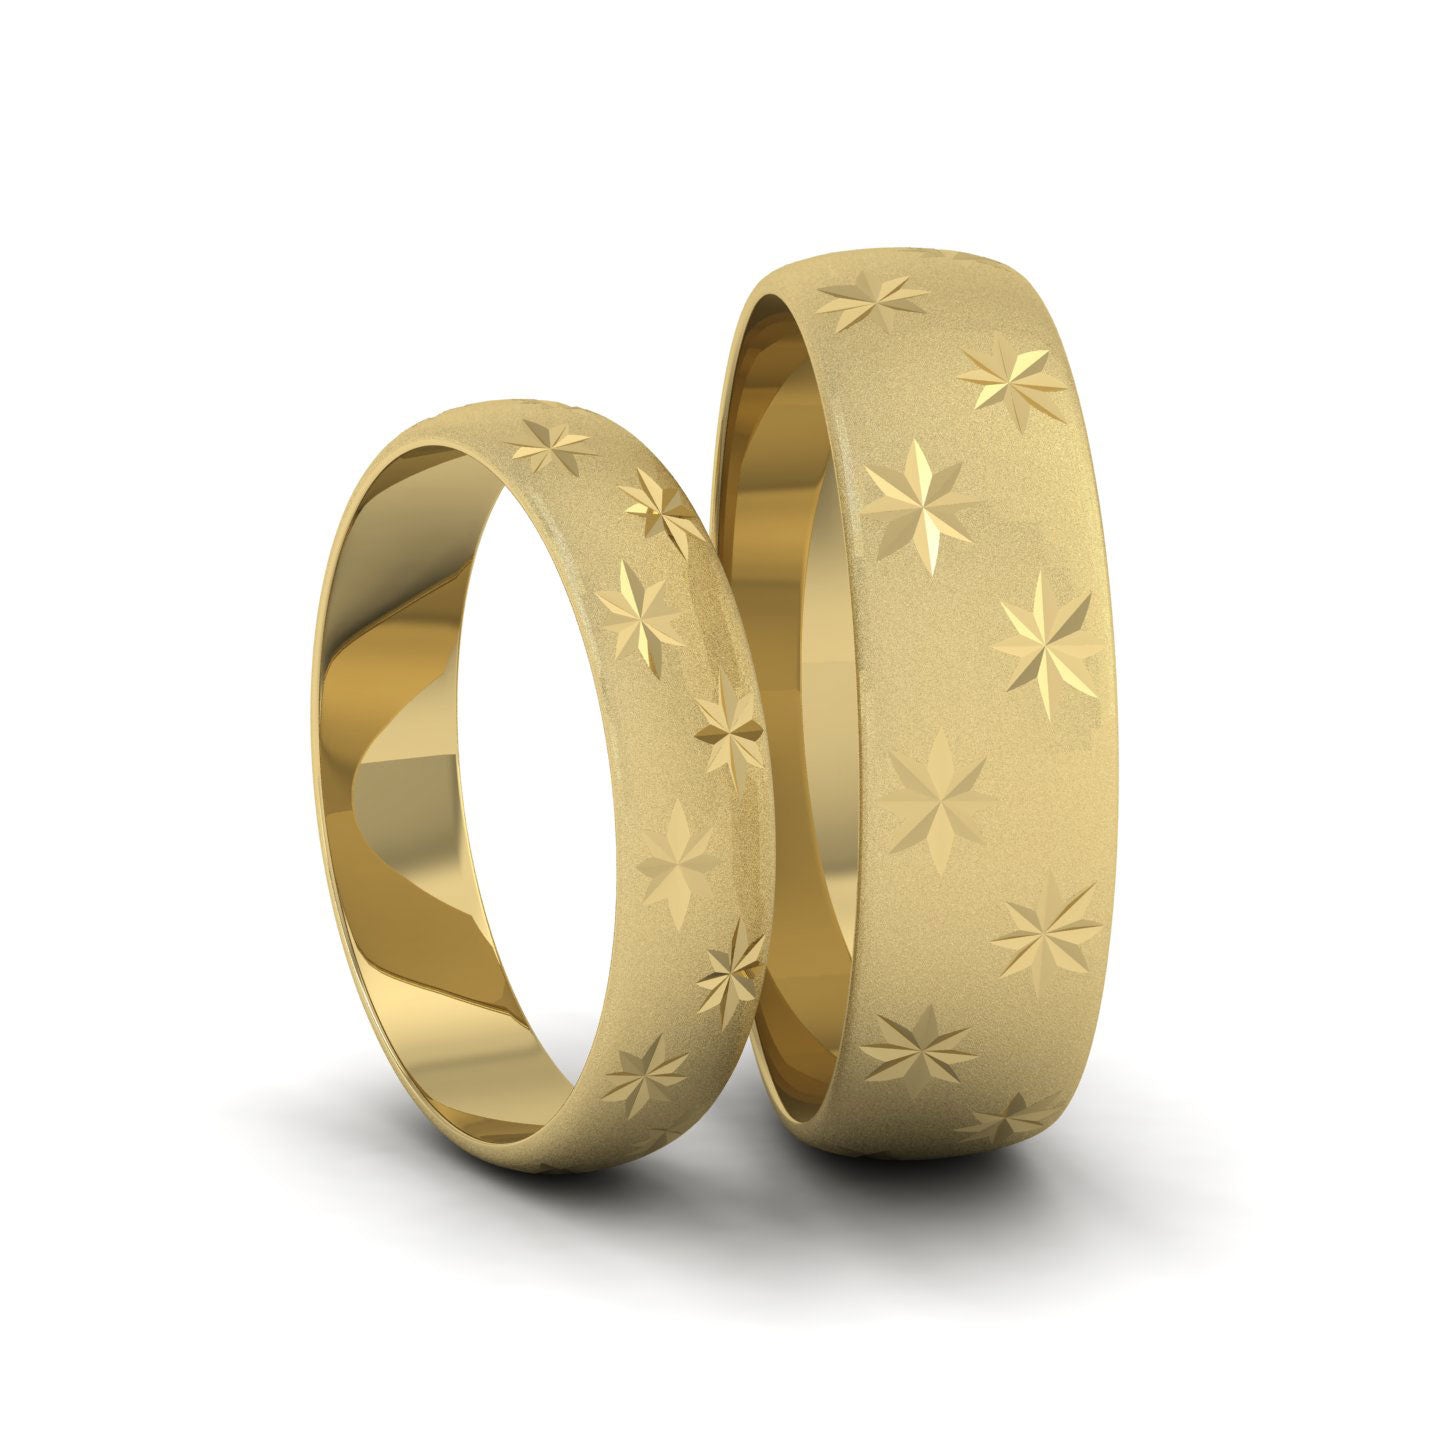 Star Patterned 14ct Yellow Gold 6mm Wedding Ring